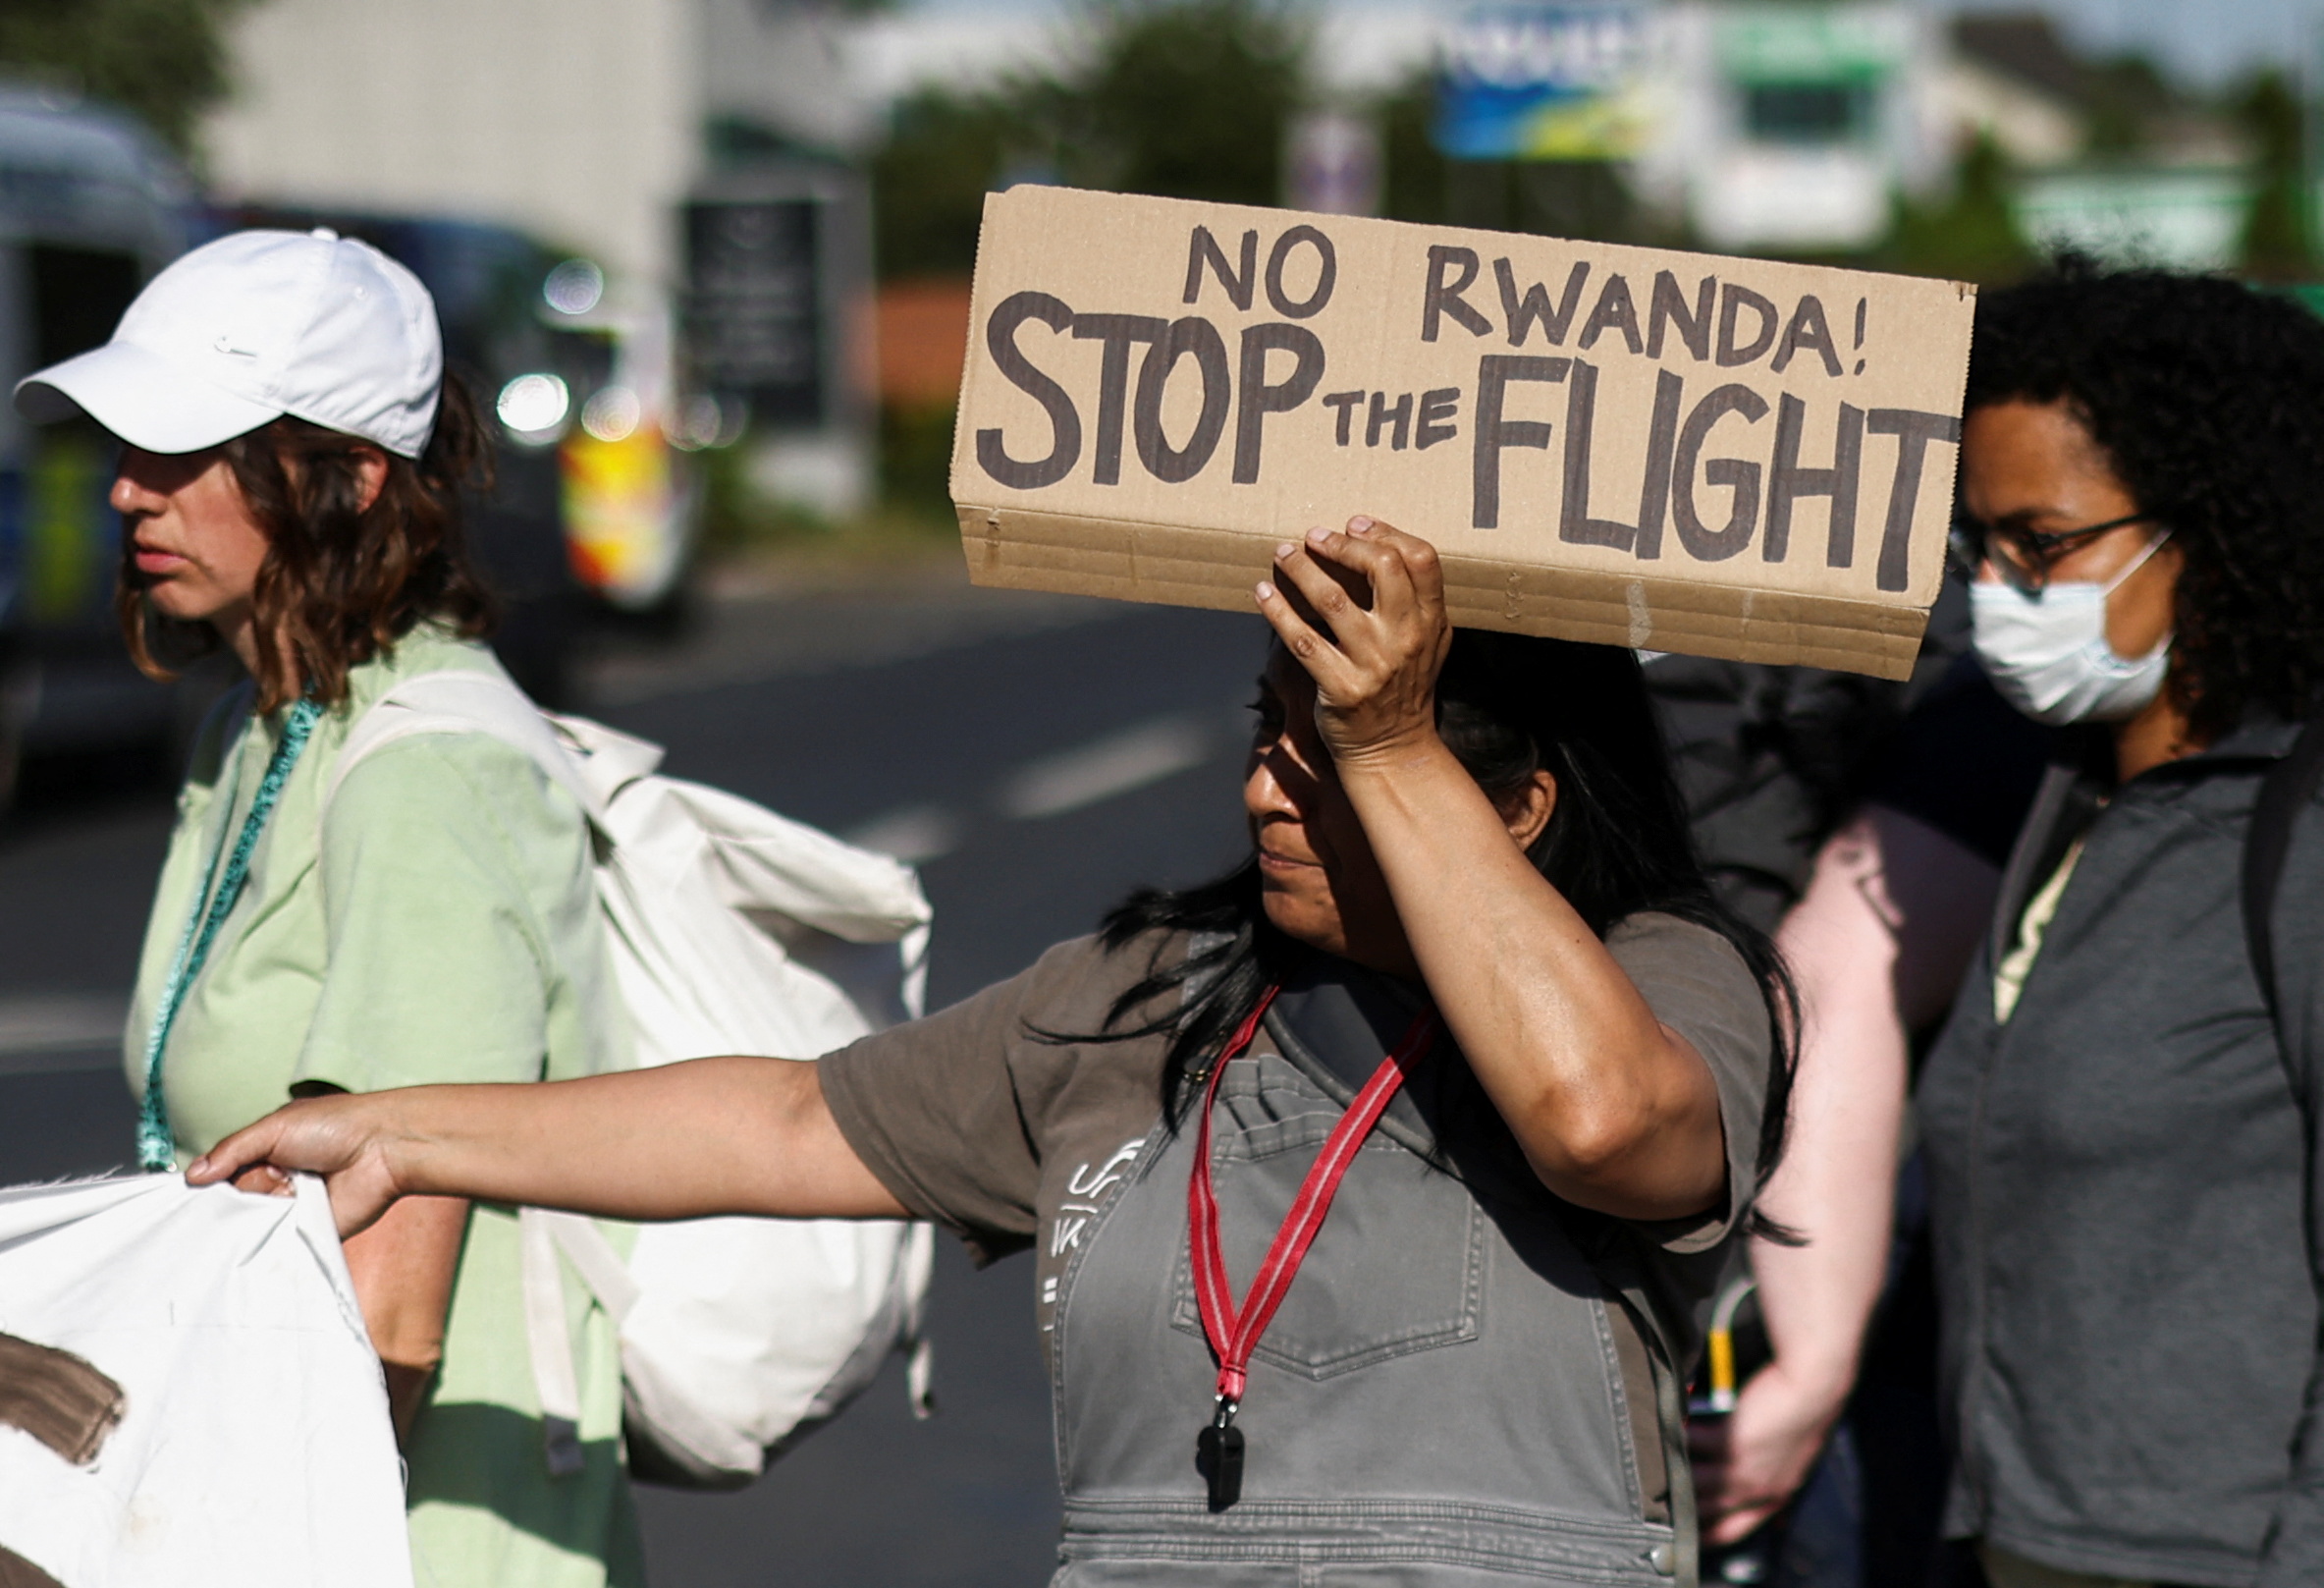 UK flight to Rwanda grounded after European court steps in